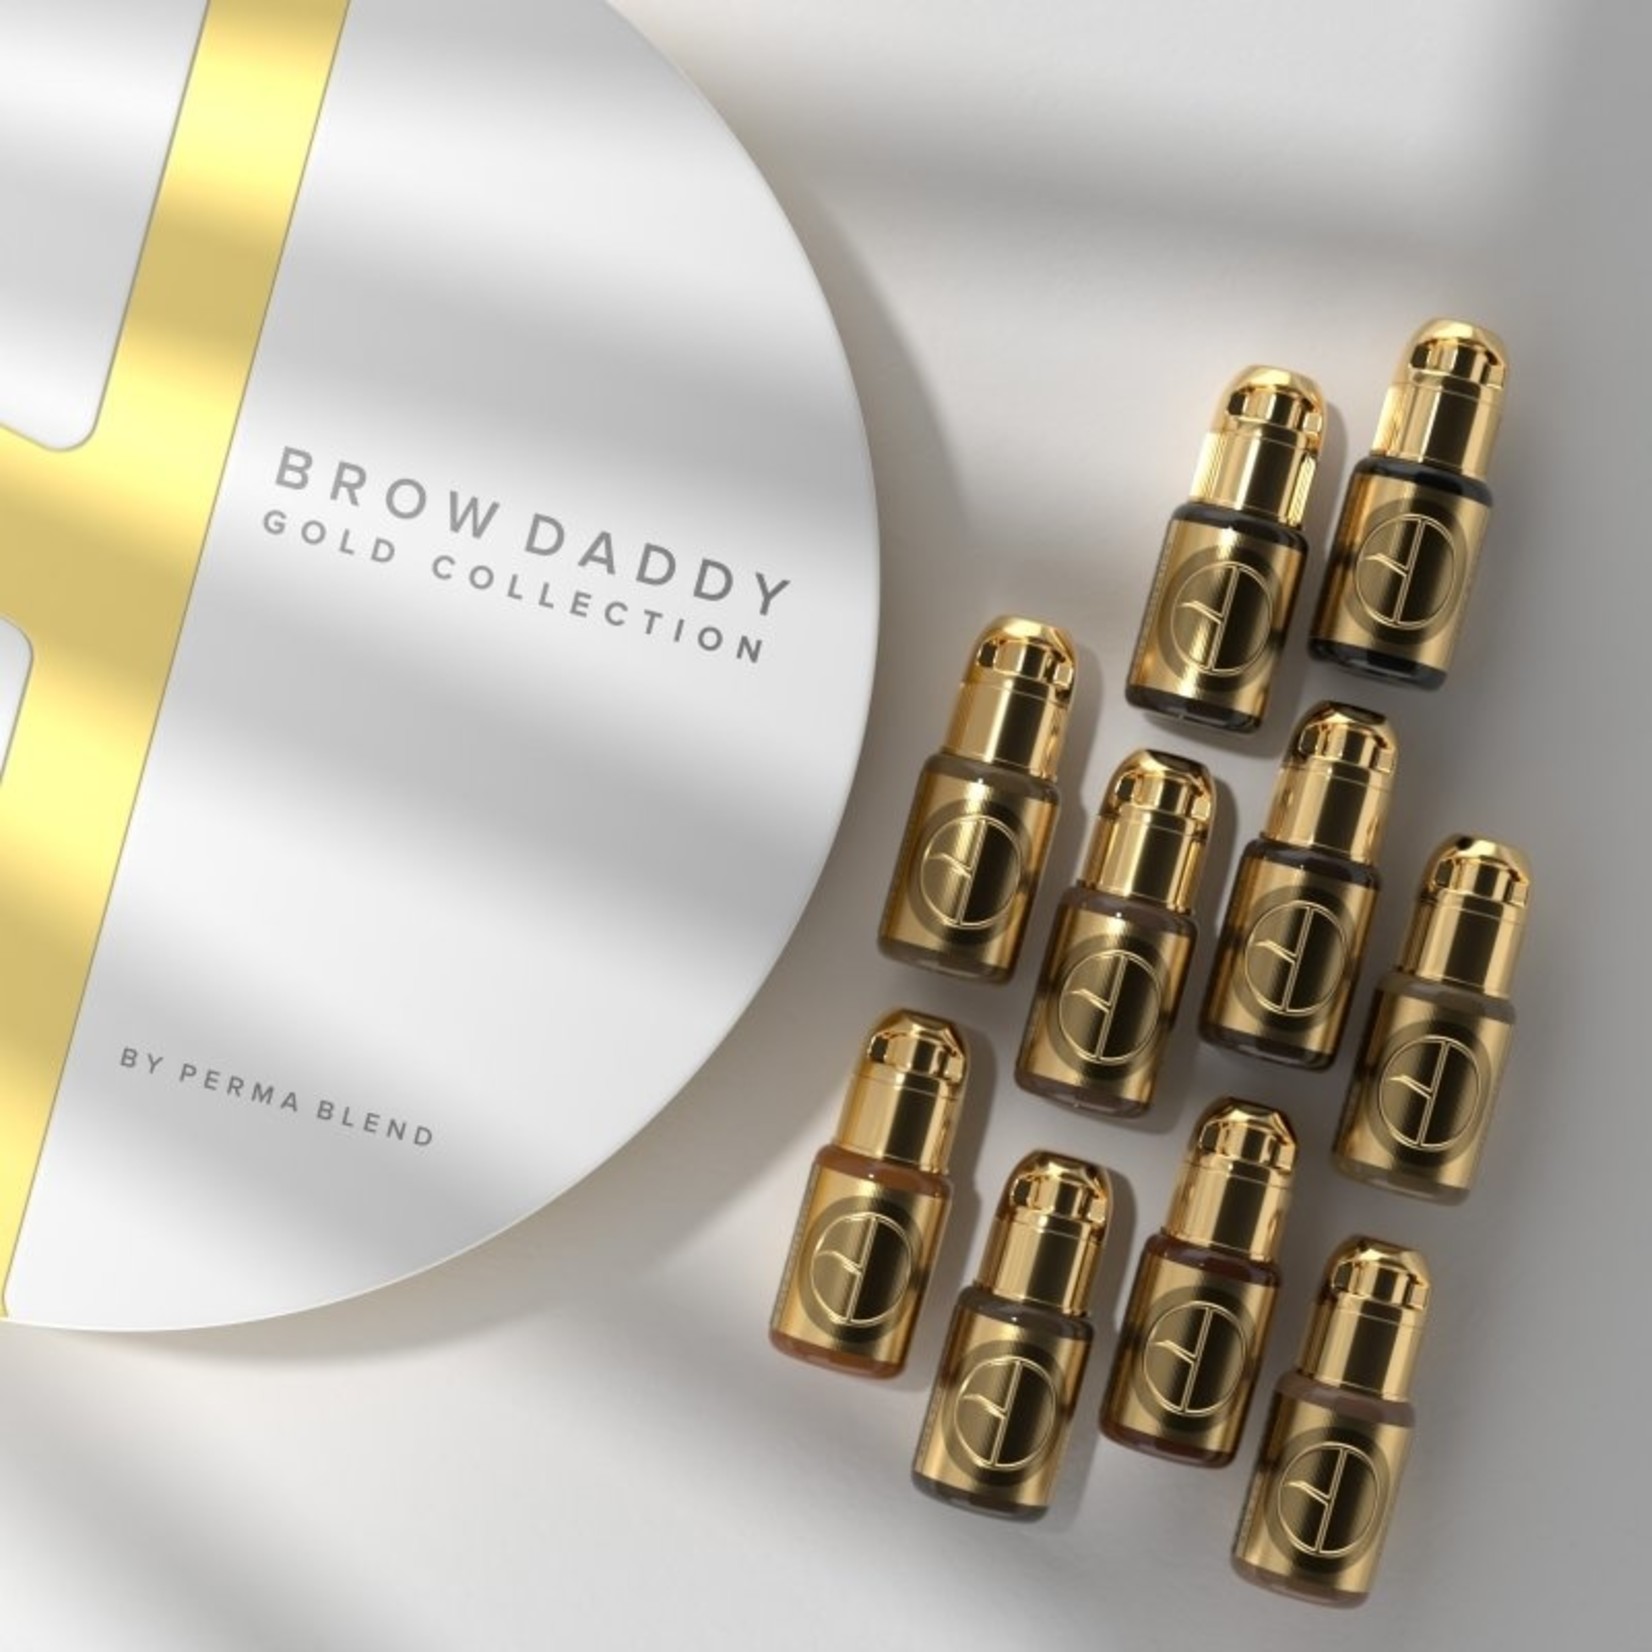 PERMA BLEND BROW DADDY - THE GOLD COLLECTION